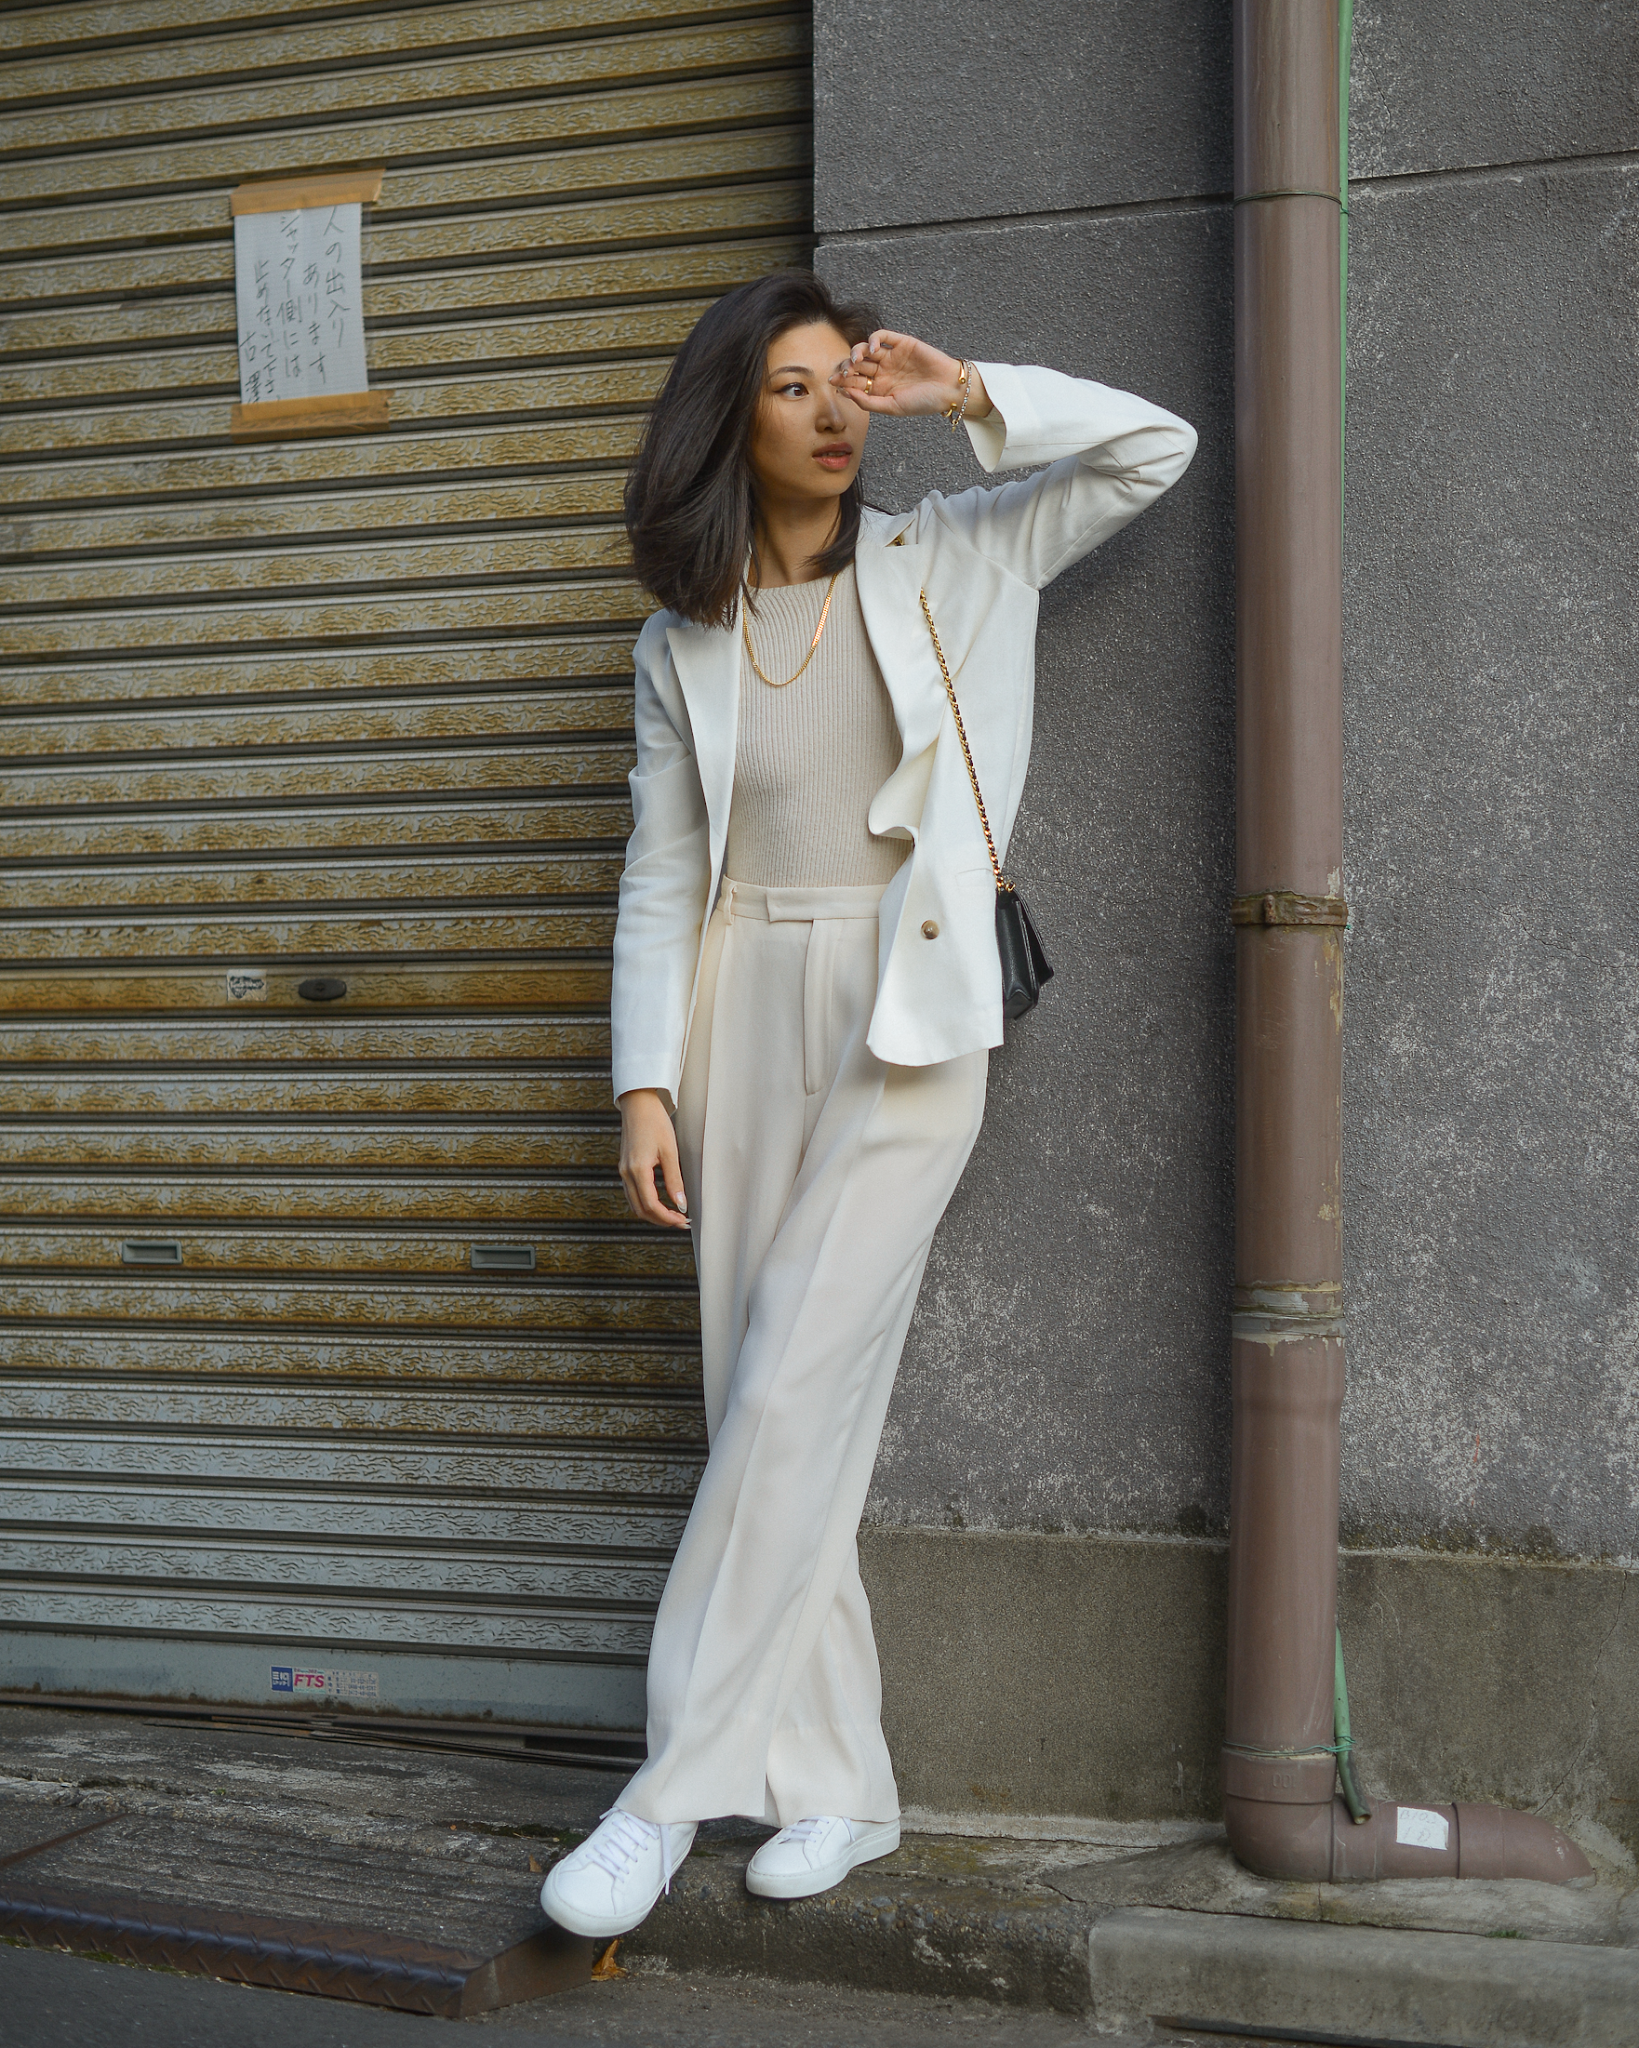 Winter white outfit ideas, styling white wide leg trousers, simple outfit ideas with white blazer, wide leg trousers and sneakers / FOREVERVANNY by Van Le